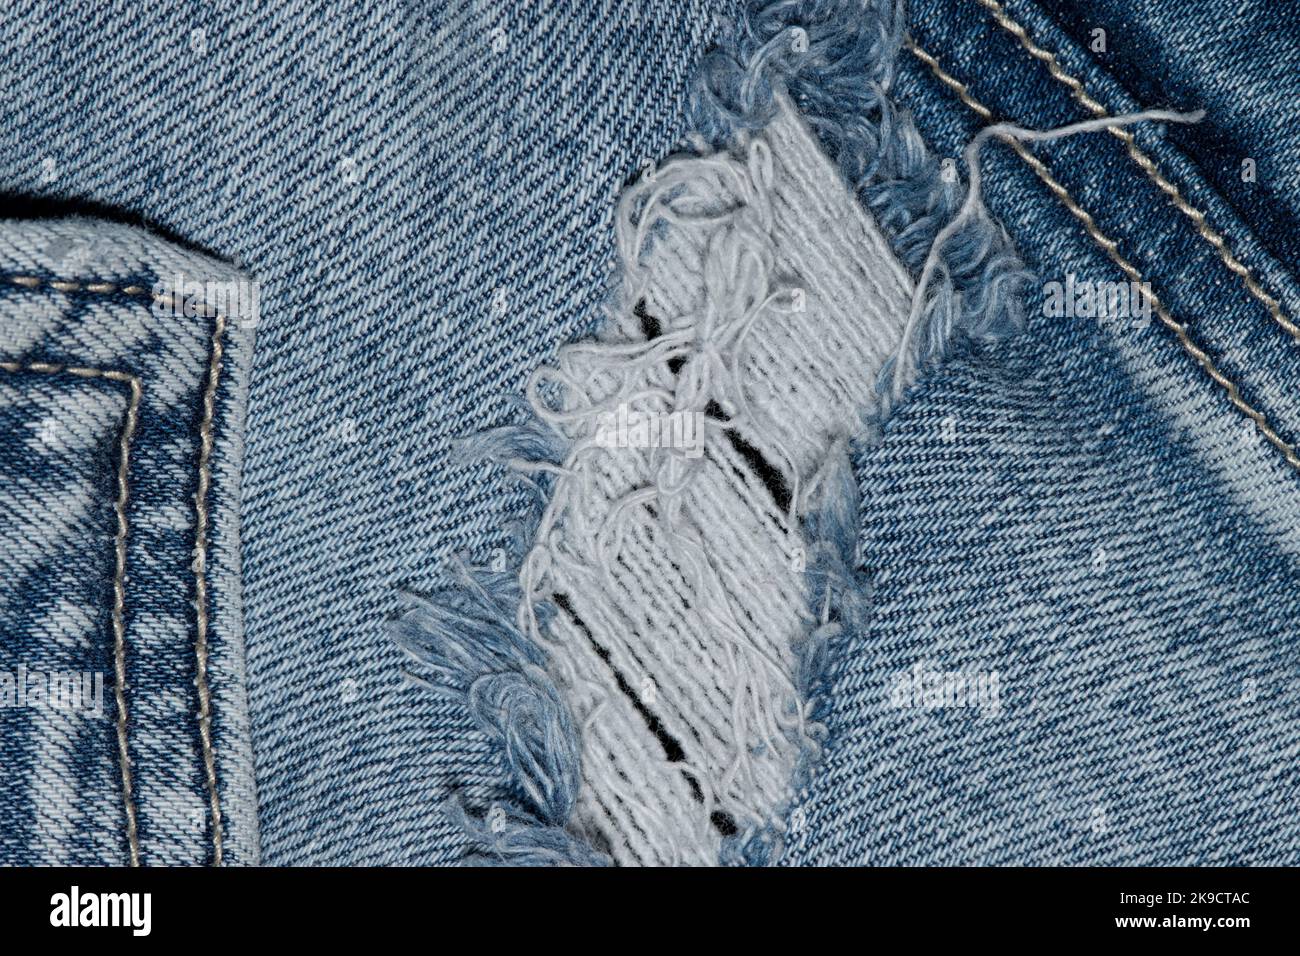 Torn blue denim clothing with pocket seams and stitching. Flat lay worn out jeans isolated section. Stock Photo